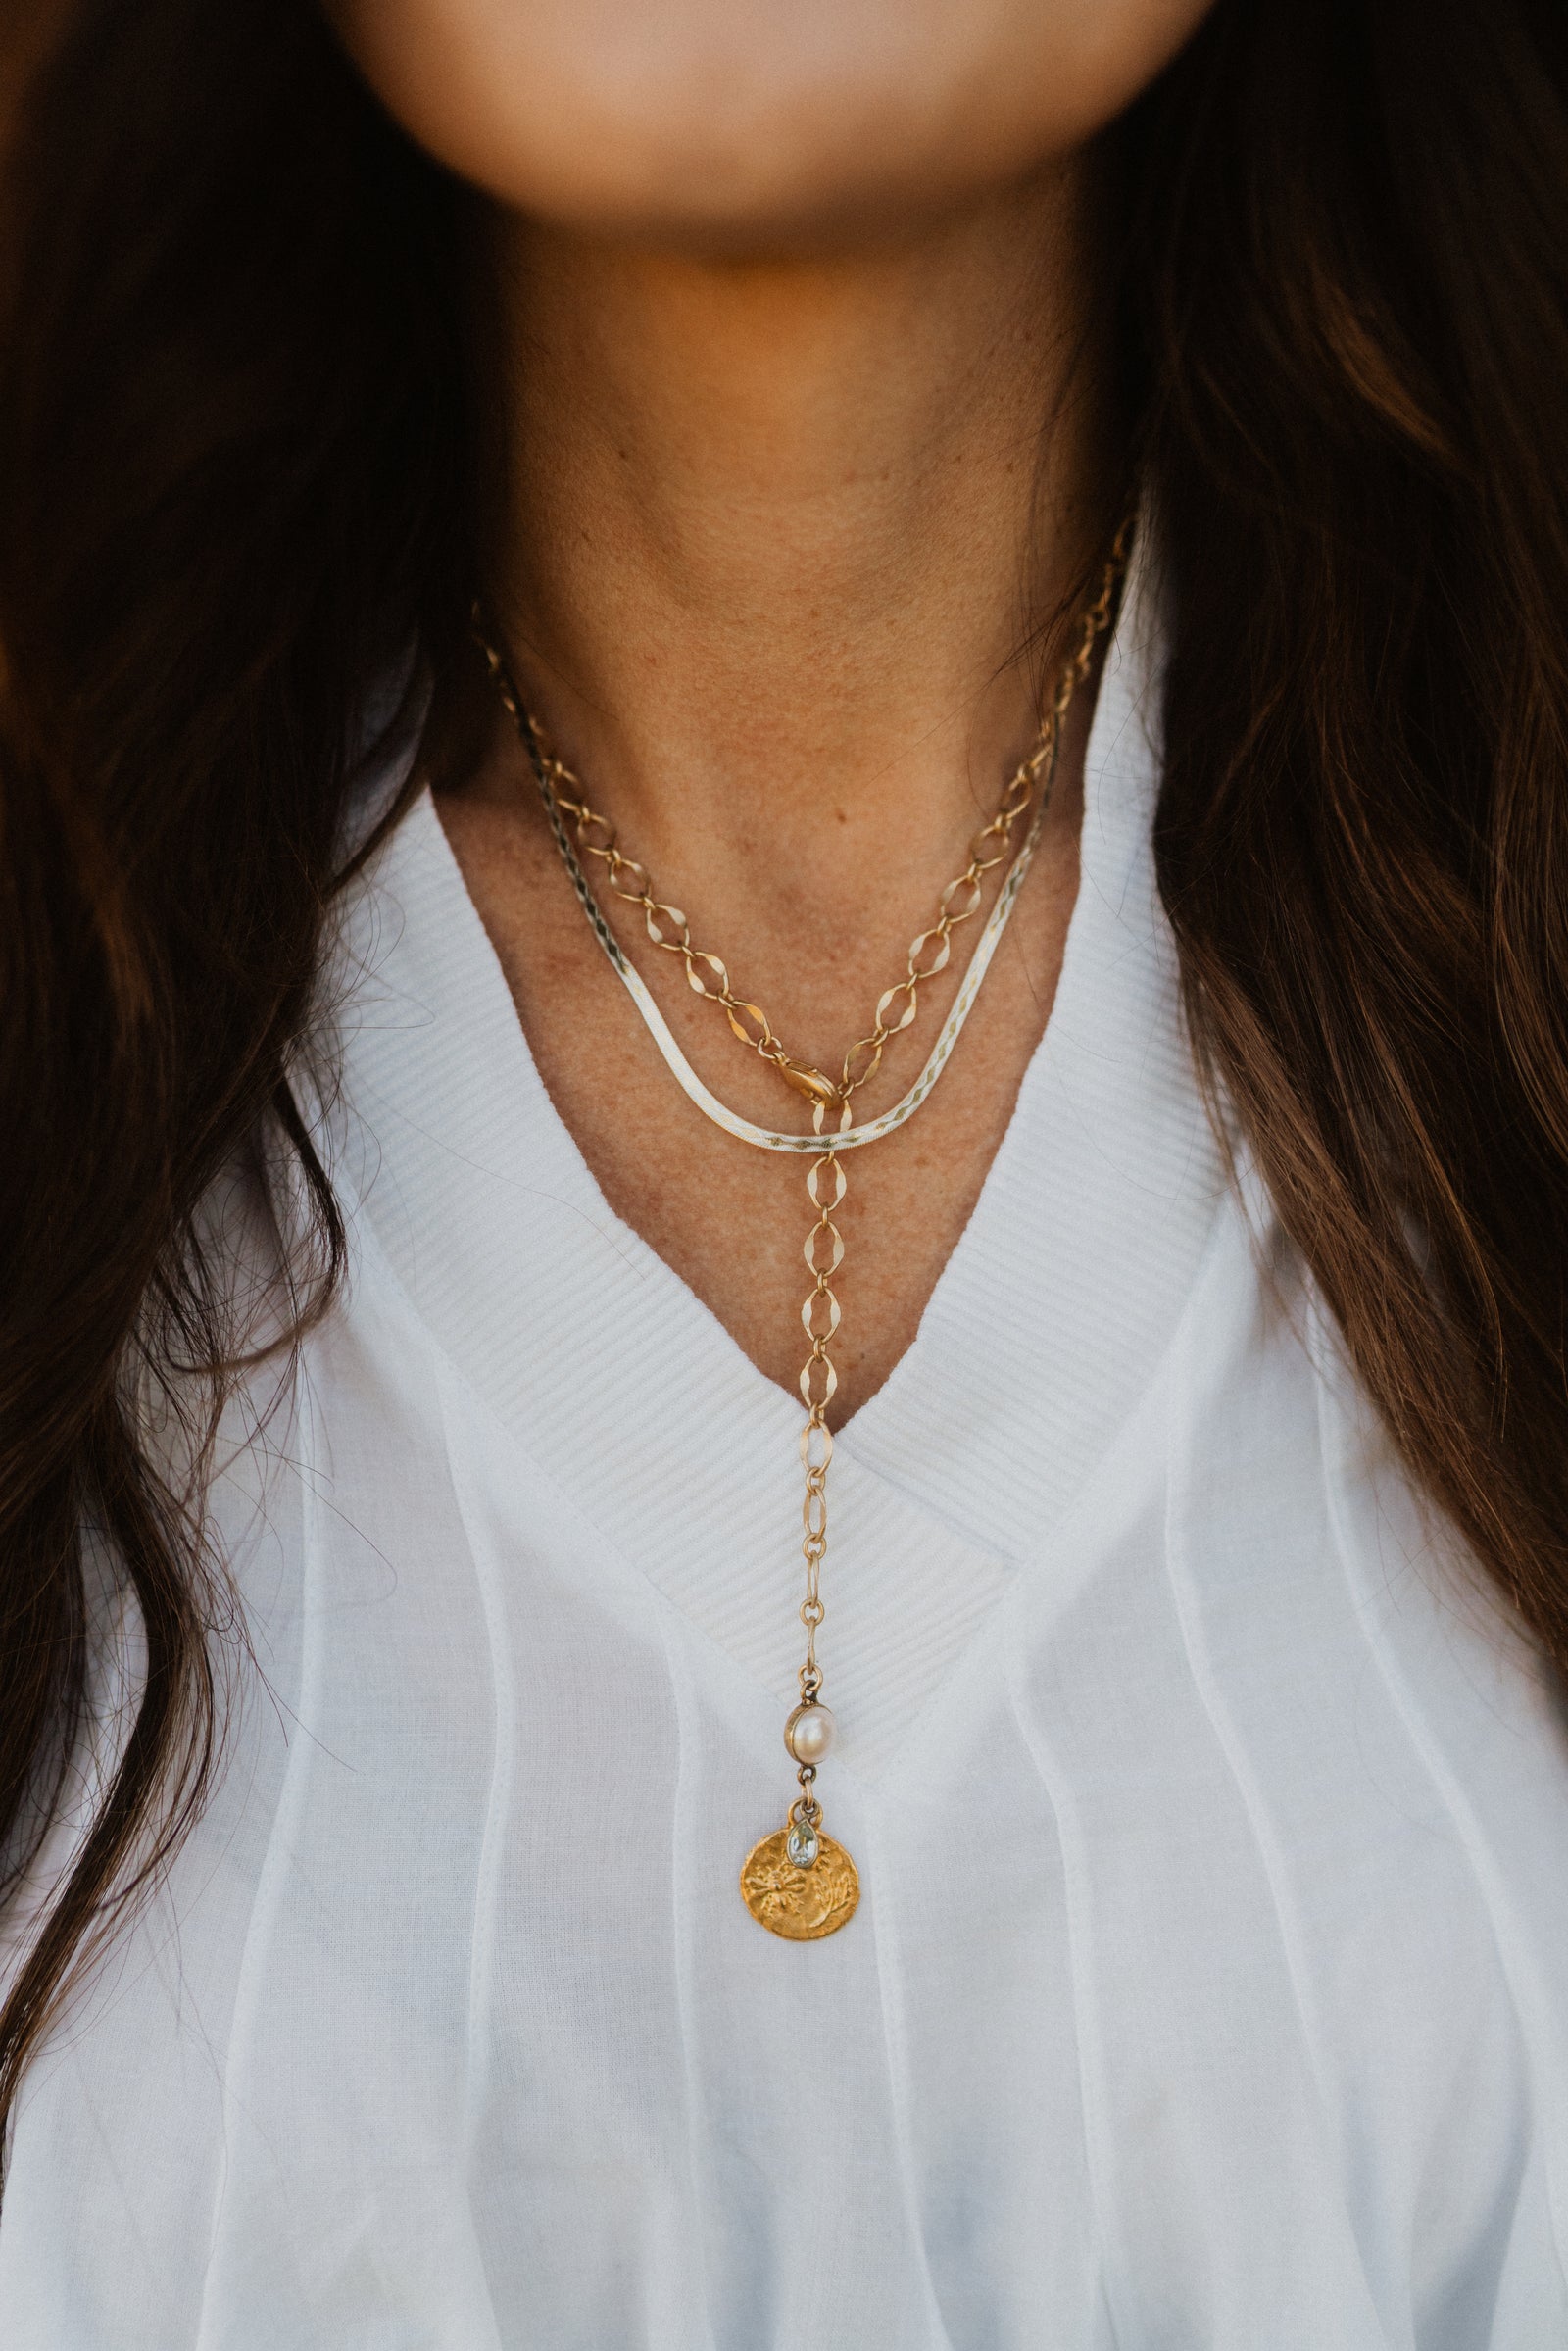 All Bees Necklace Set